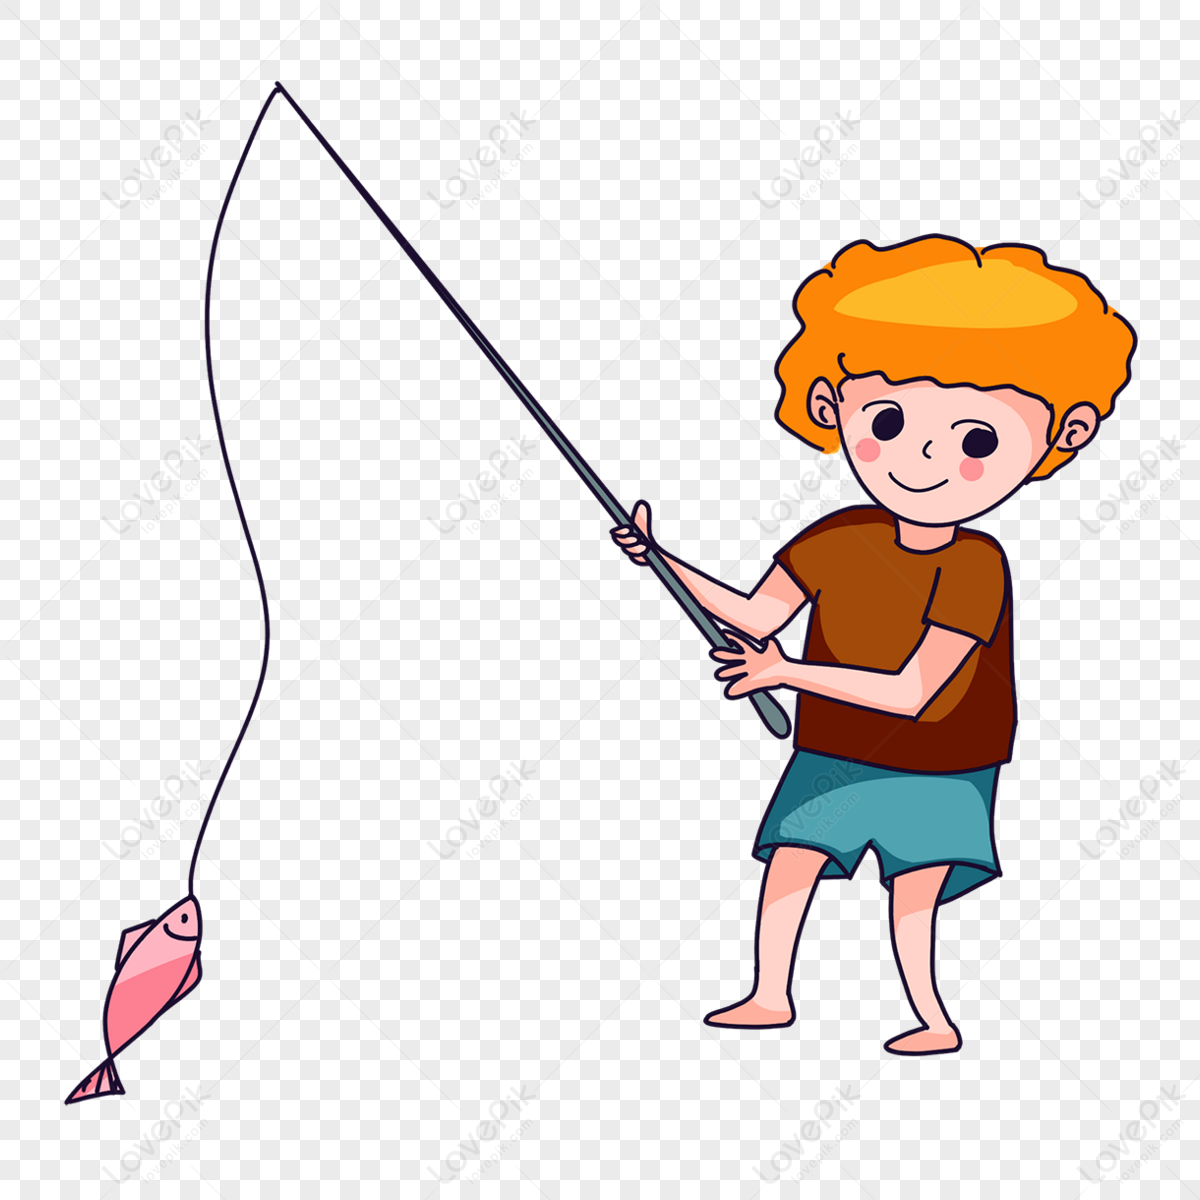 Boy Fishing, Fish, Chub Fish, Solar Terms PNG Hd Transparent Image And  Clipart Image For Free Download - Lovepik